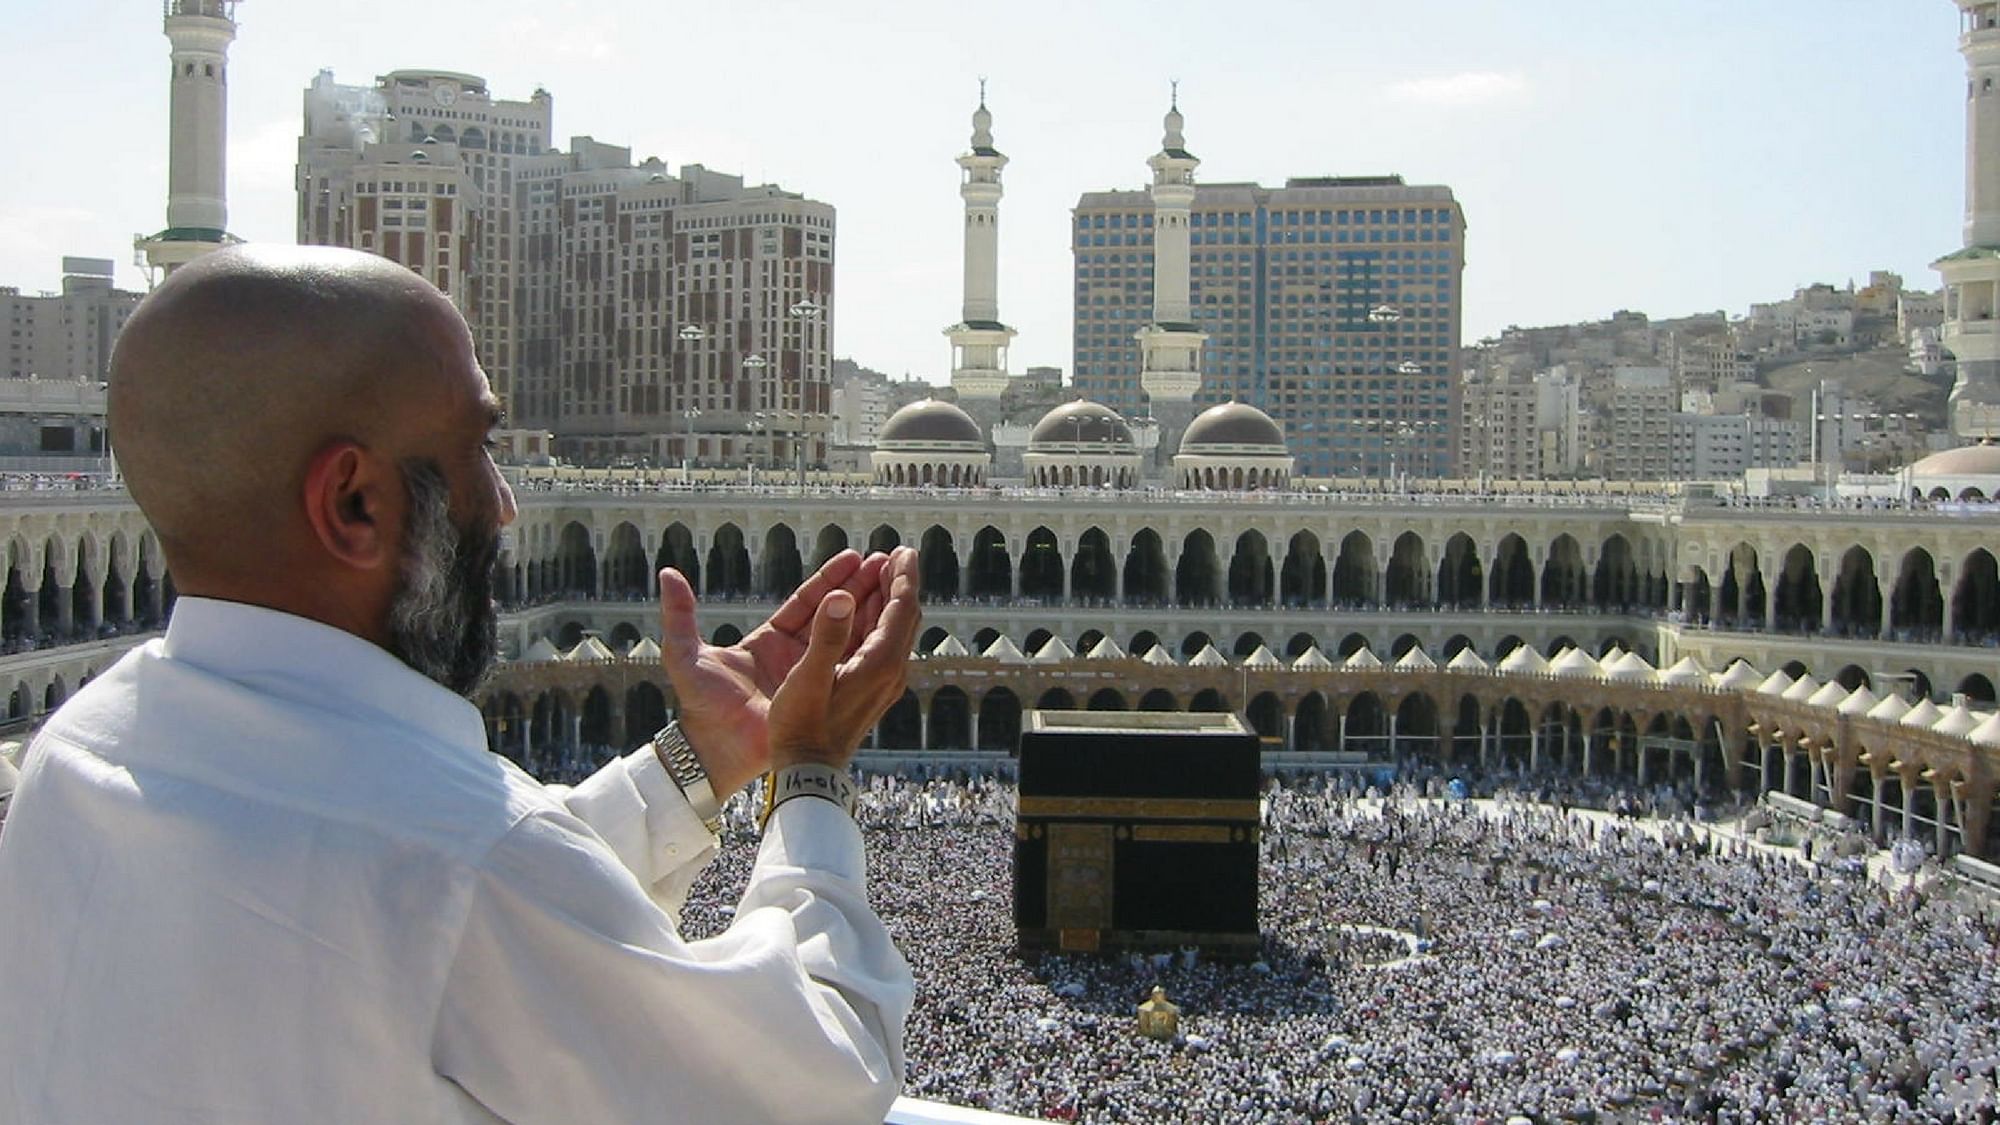 Photo of a pilgrim in supplication. Image used for representational purposes.